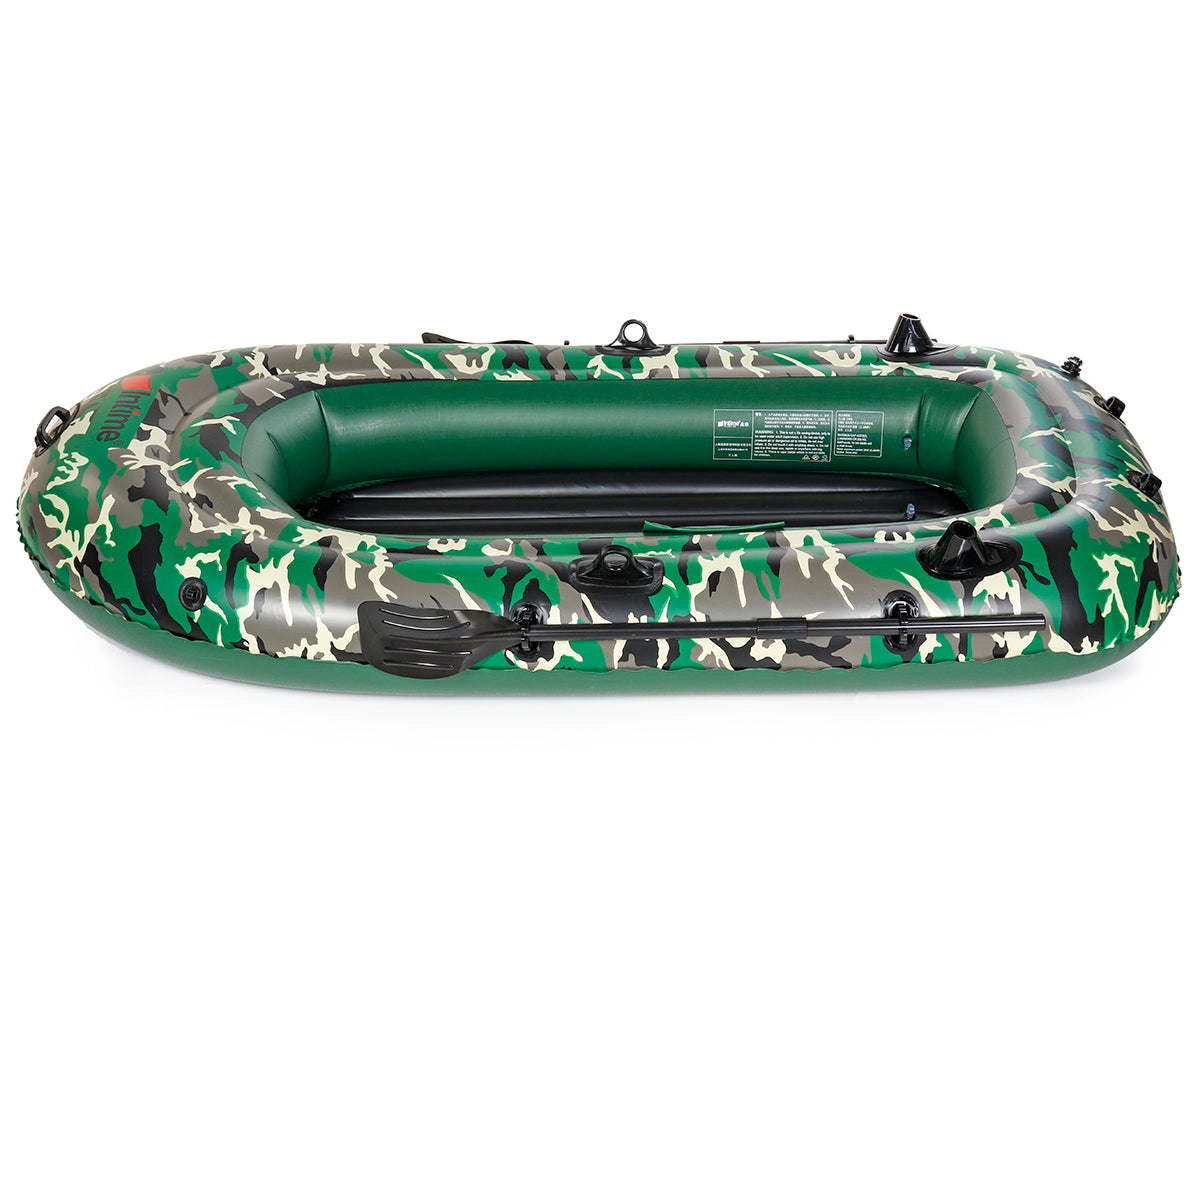 Dim Gray Two Person Inflatable Fishing Boat Thickened Rubber Kayak Boat With Inflatable Pump Outdoor